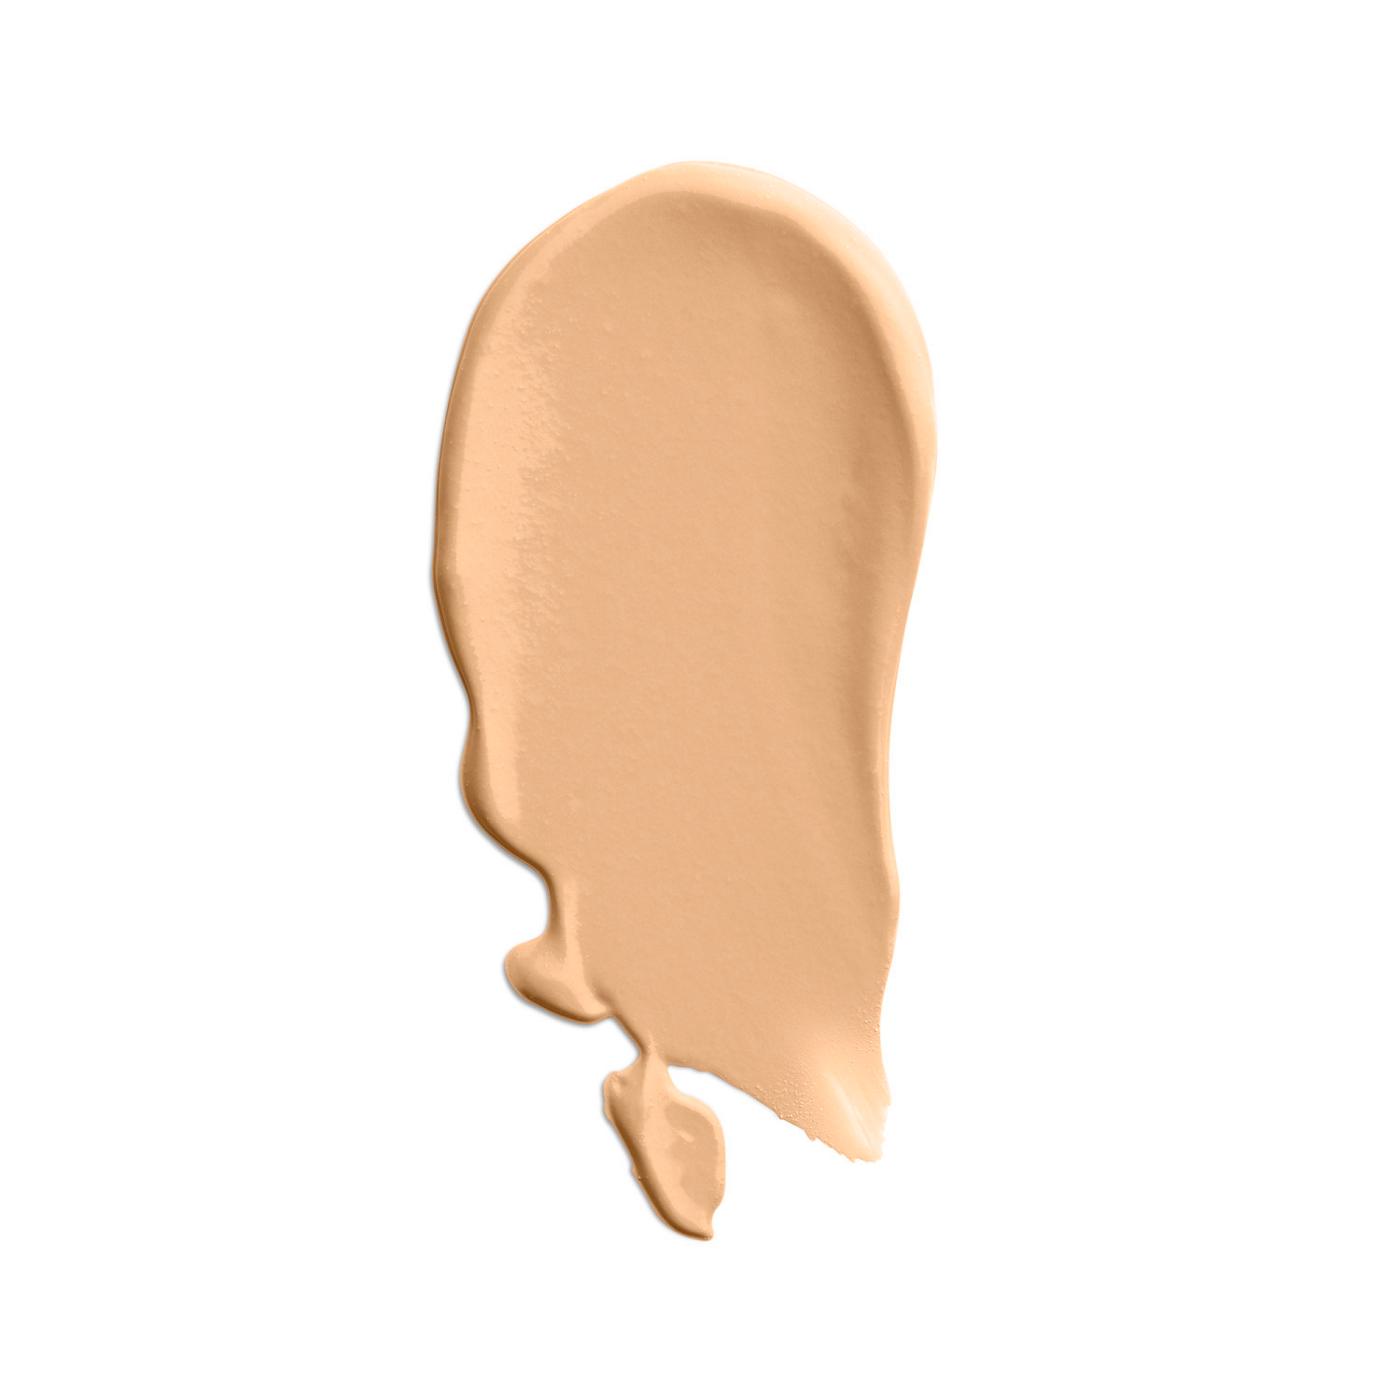 Covergirl TruBlend Matte Made Foundation M30 Honey; image 5 of 11